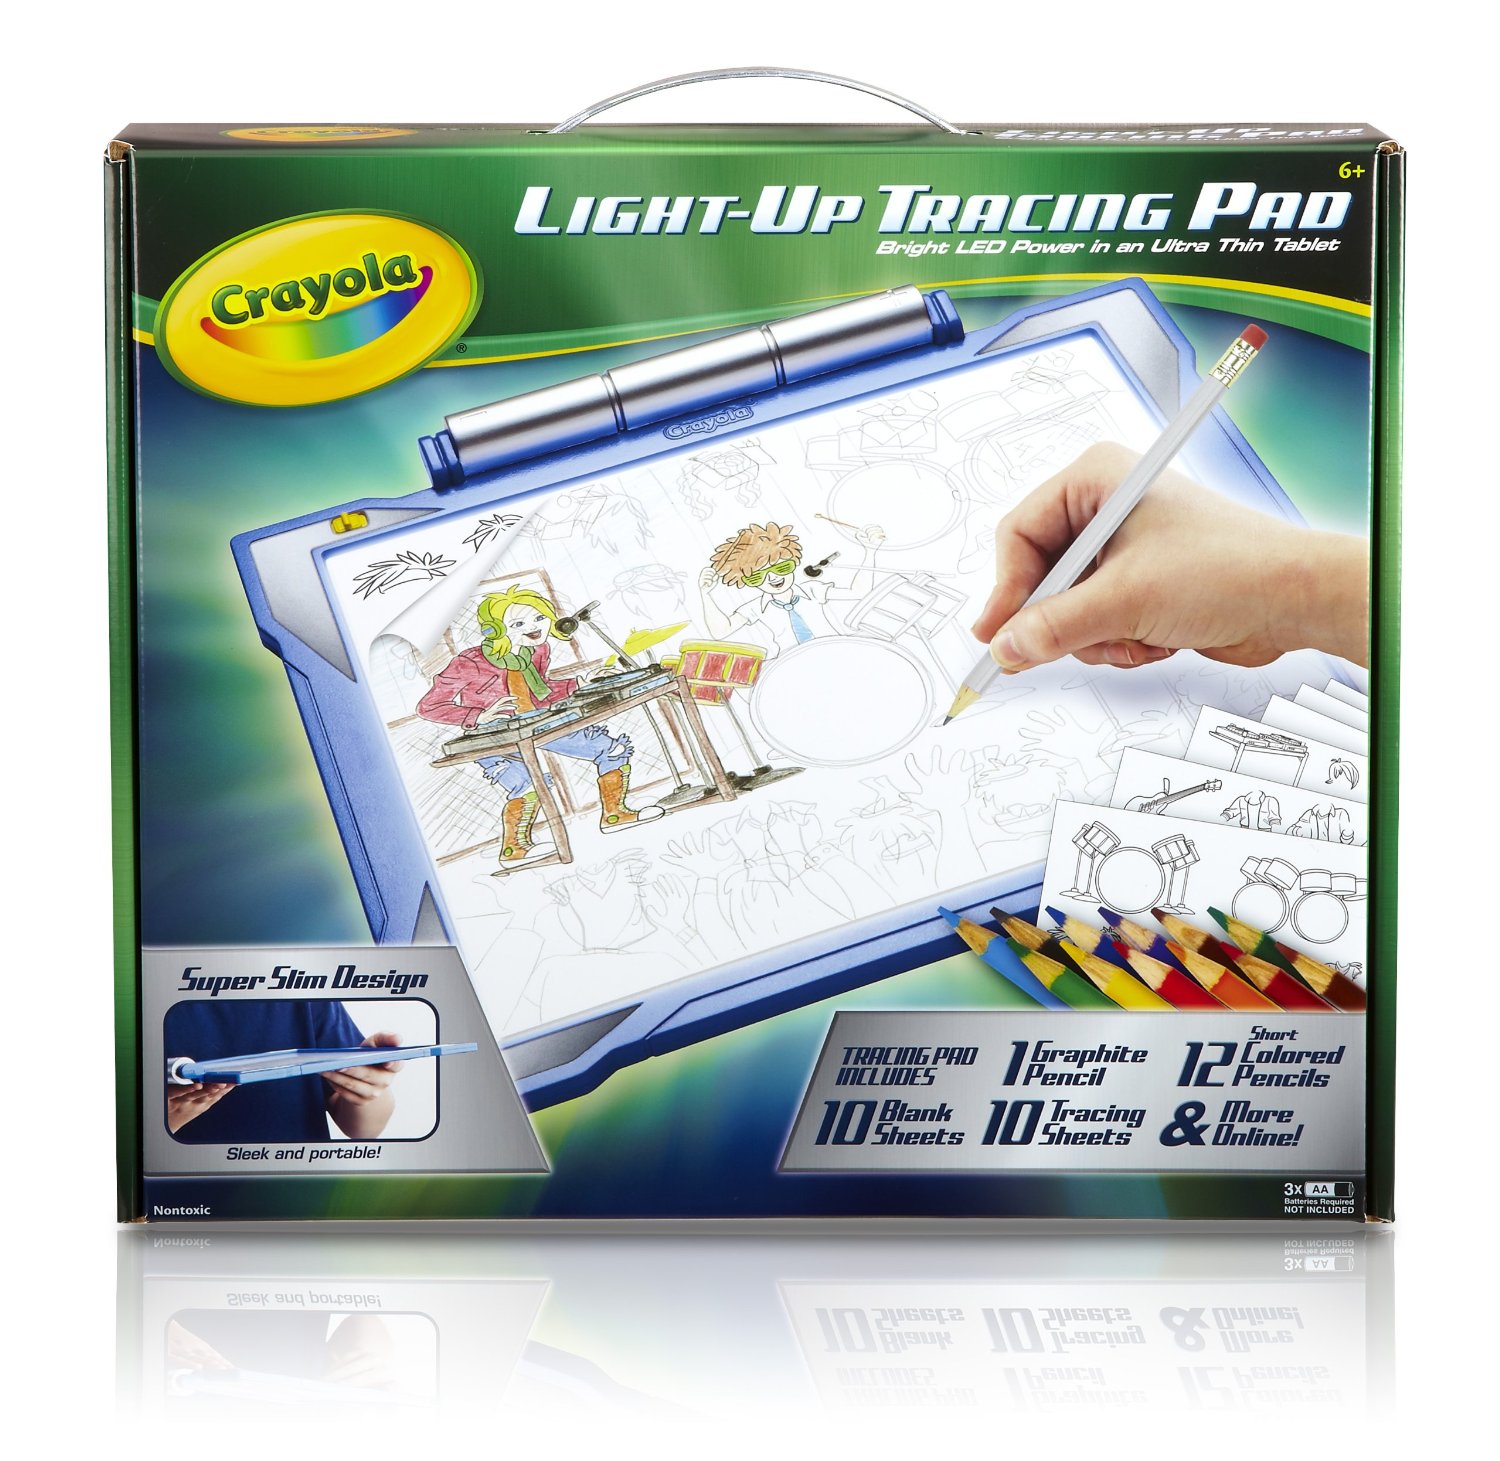 Crayola Light-Up Tracing Pad Kit Only $14.97! - Become a Coupon Queen